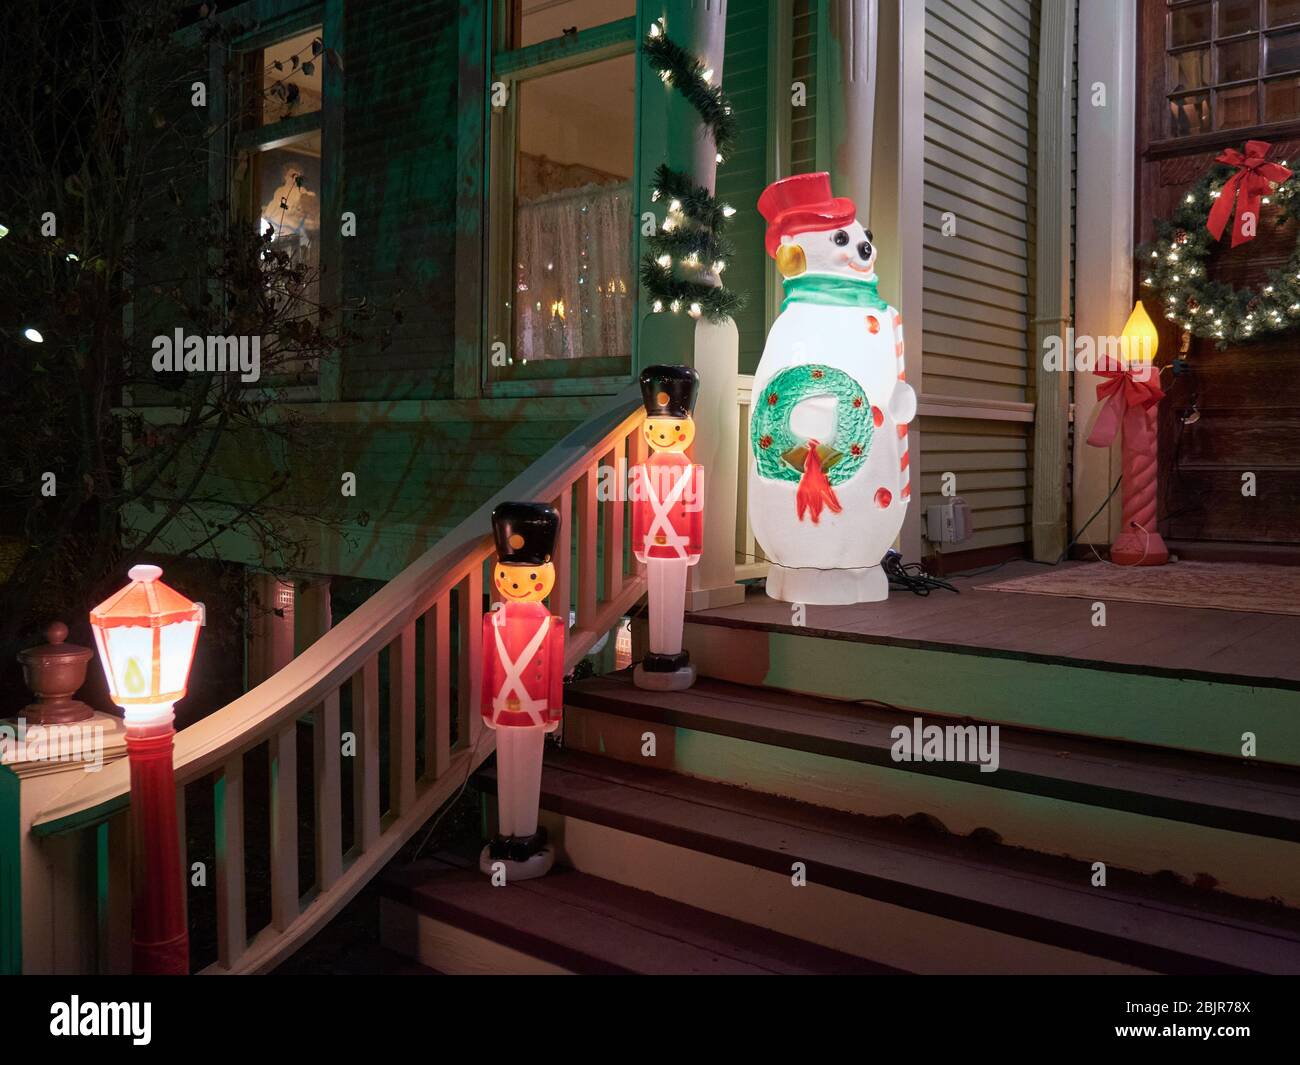 Christmas seasonal holiday blow mold decorations on stairs leading into a house. Toy soldier, snowman, candle and streetlight. Stock Photo